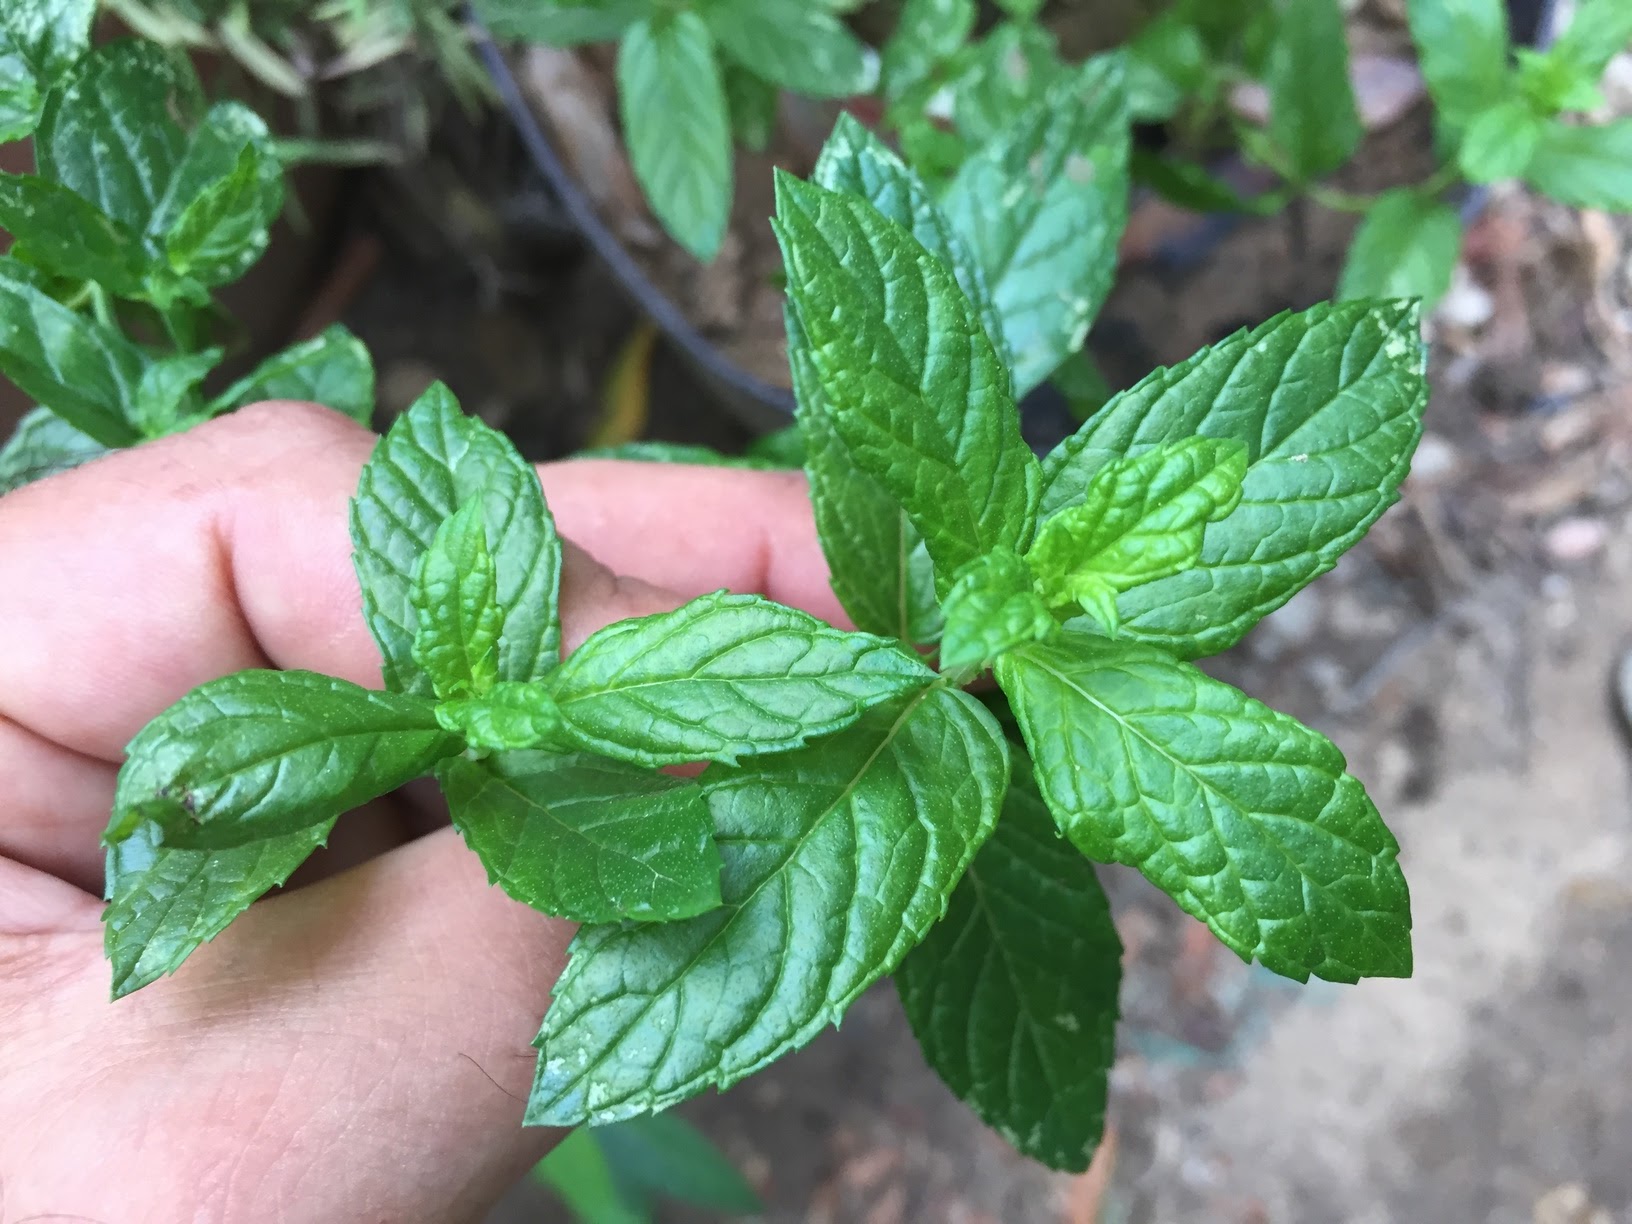 Mint is a perennial herb grown for its leaves. They are wonderful infused in hot water to make a refreshing tea, chopped and added to many dishes, or used to make mint sauce. Ideally, mint should be planted in the spring, or in the fall if you're in a climate that is frost free.